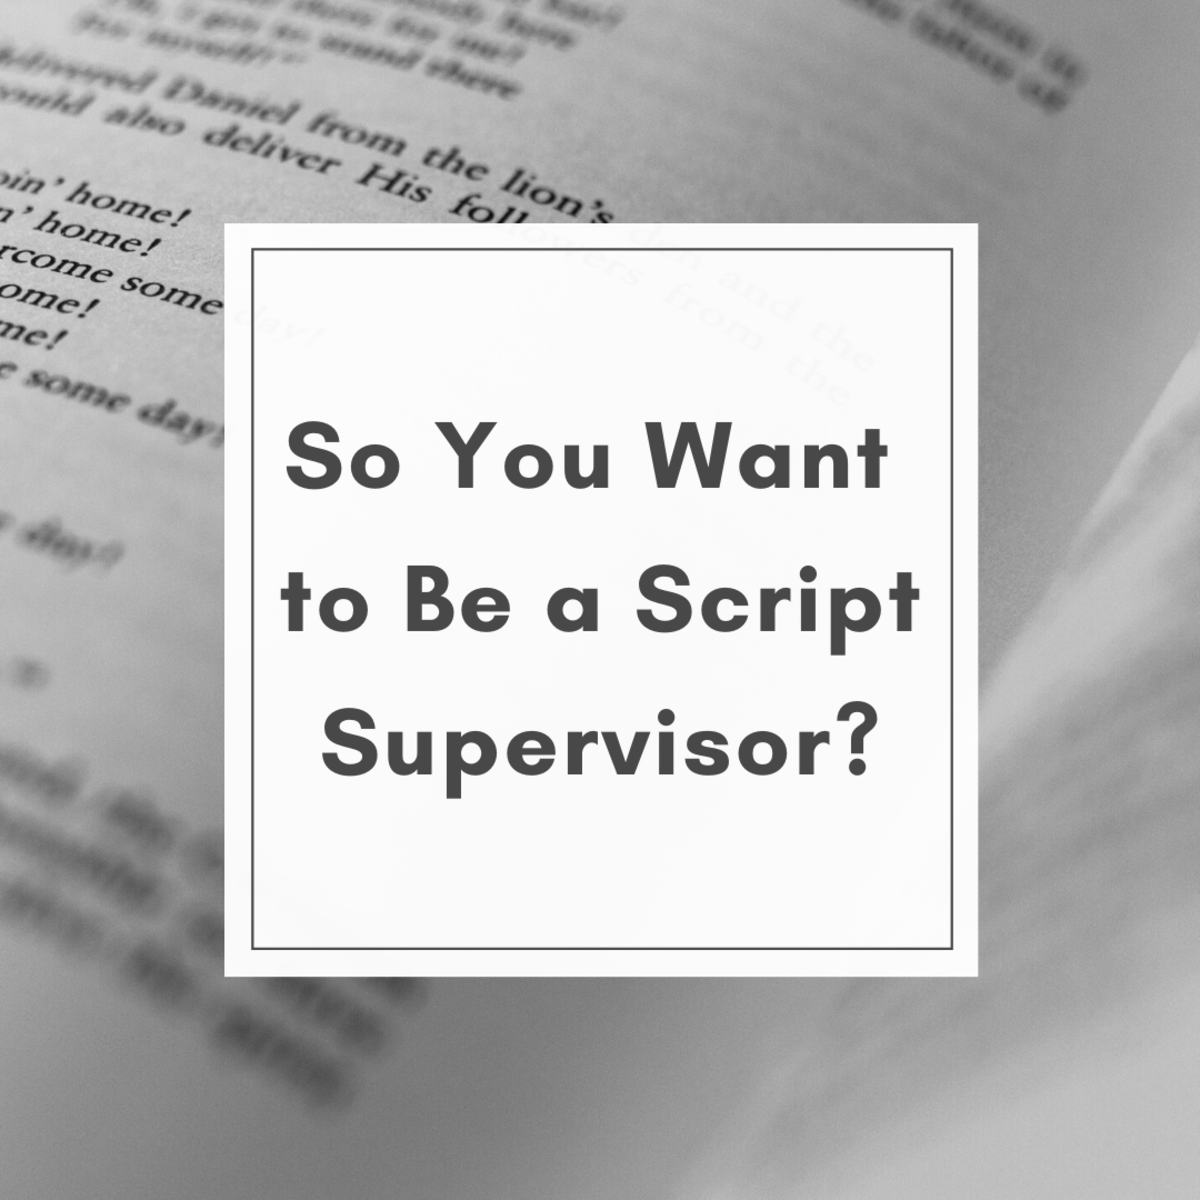 Learn the basics of being a script supervisor! 